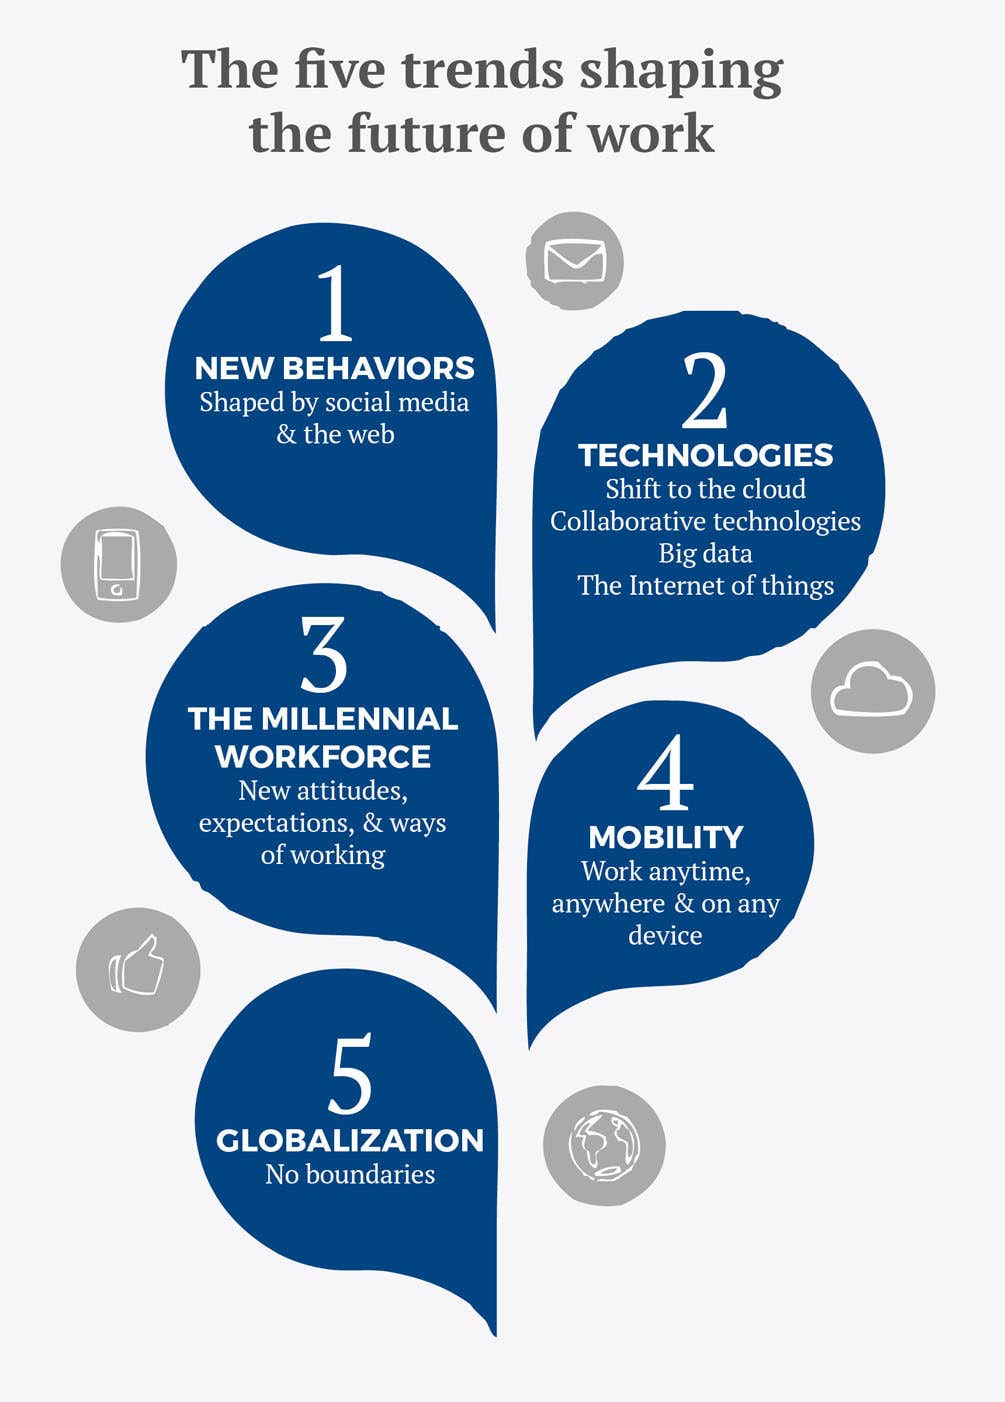 IE Insights infographic showing the five trends shaping the future of work